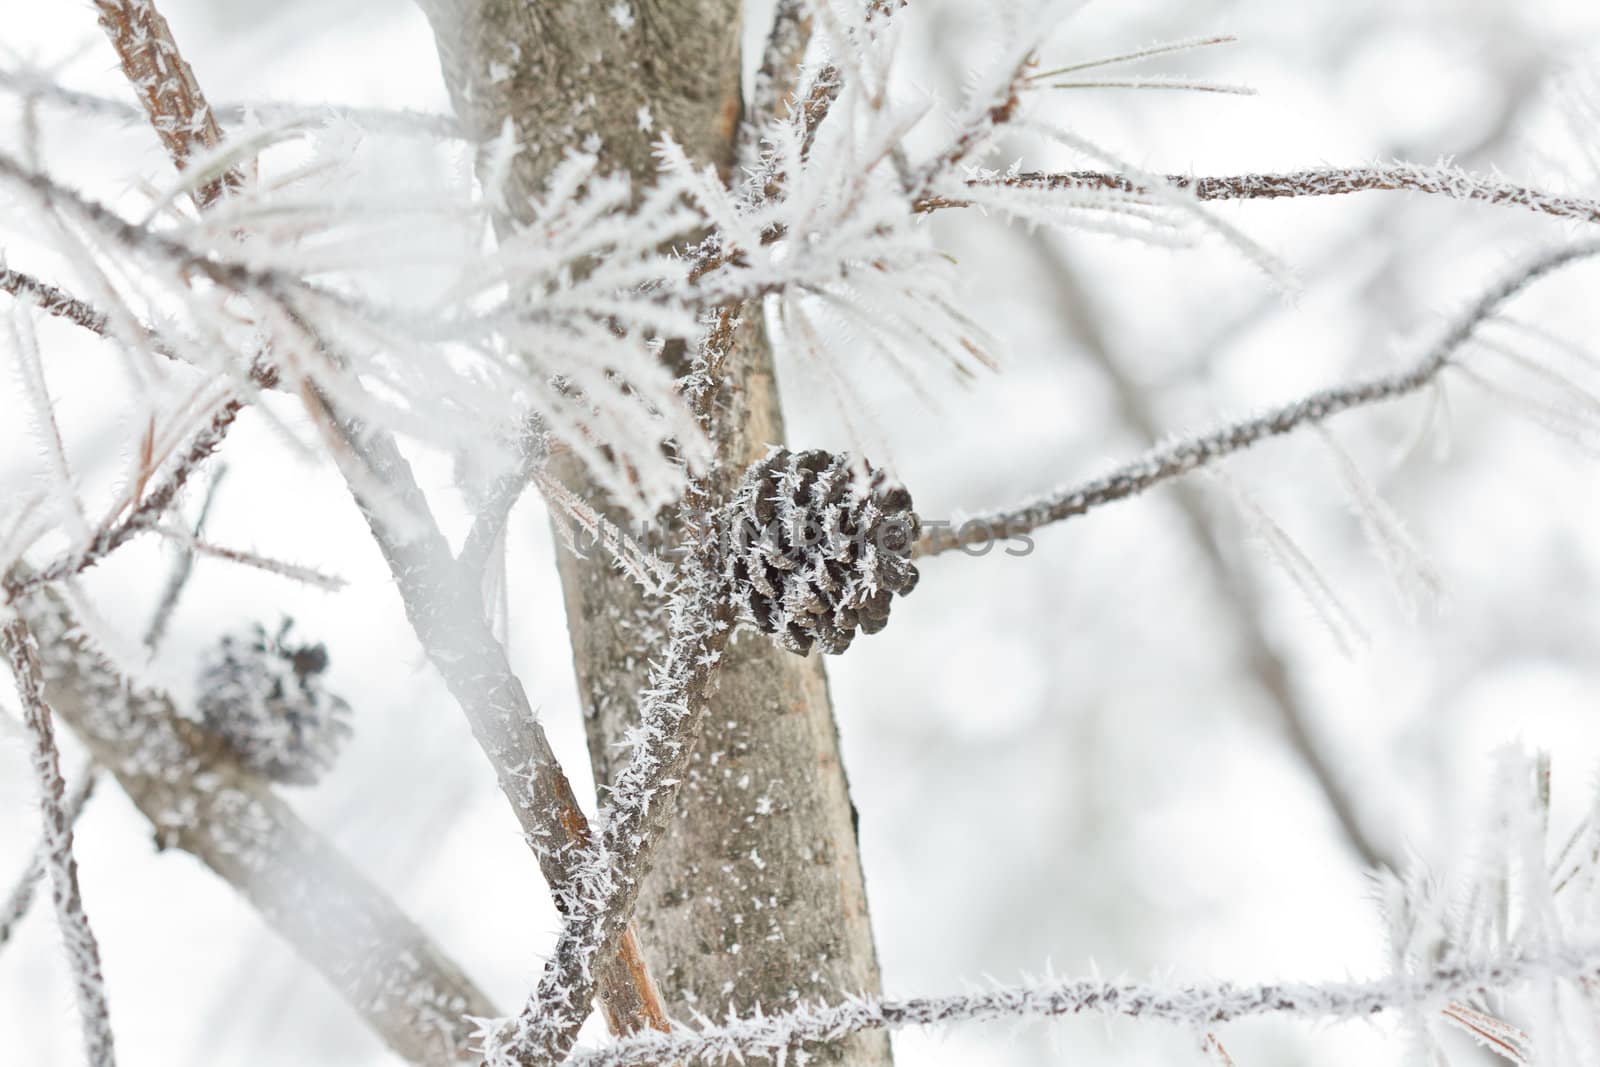 Snow covered pine cone with ice crystal forming due to the cold weather